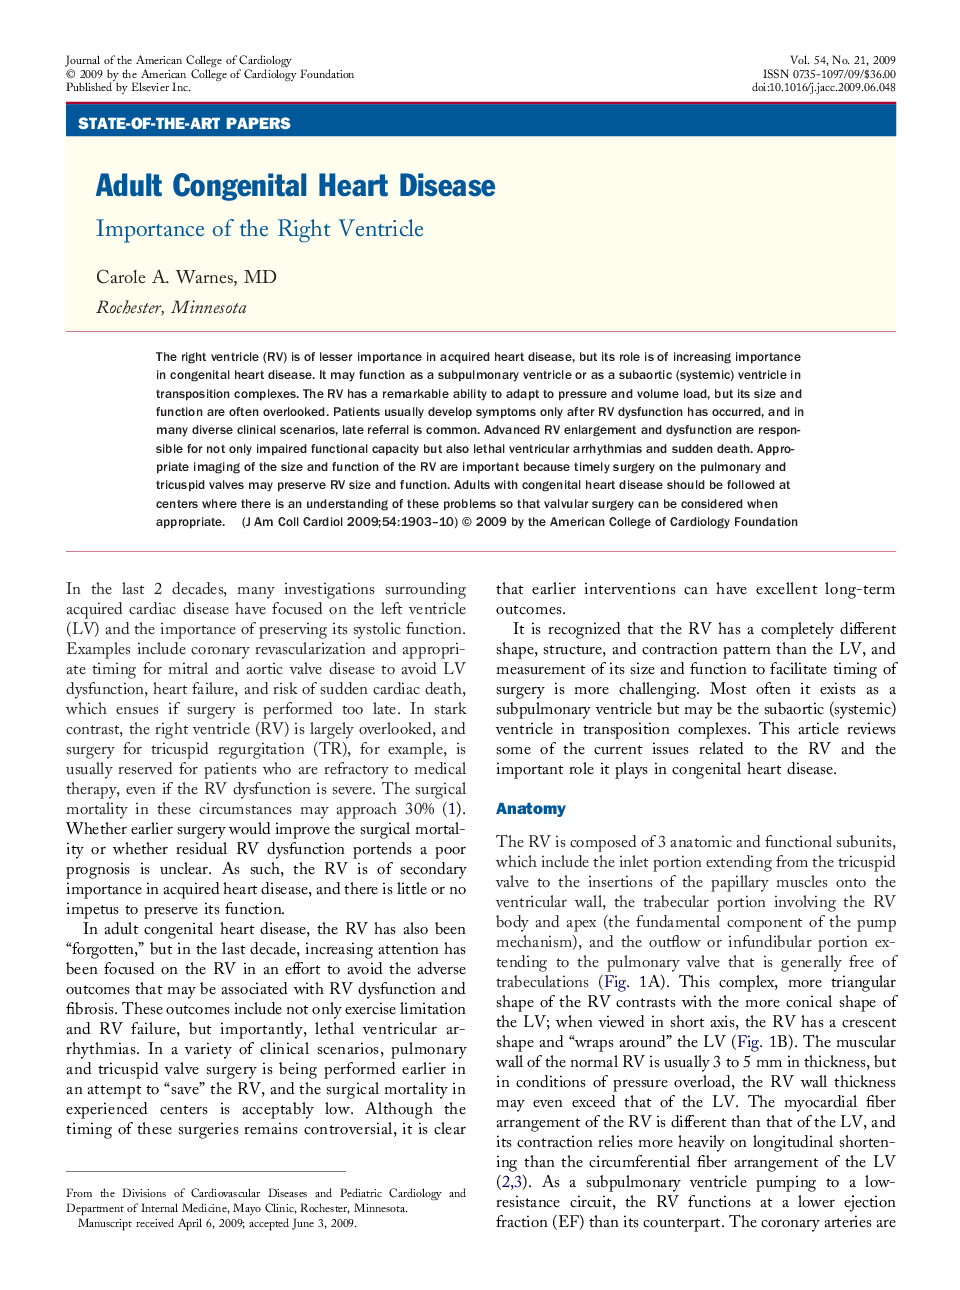 Adult Congenital Heart Disease: Importance of the Right Ventricle